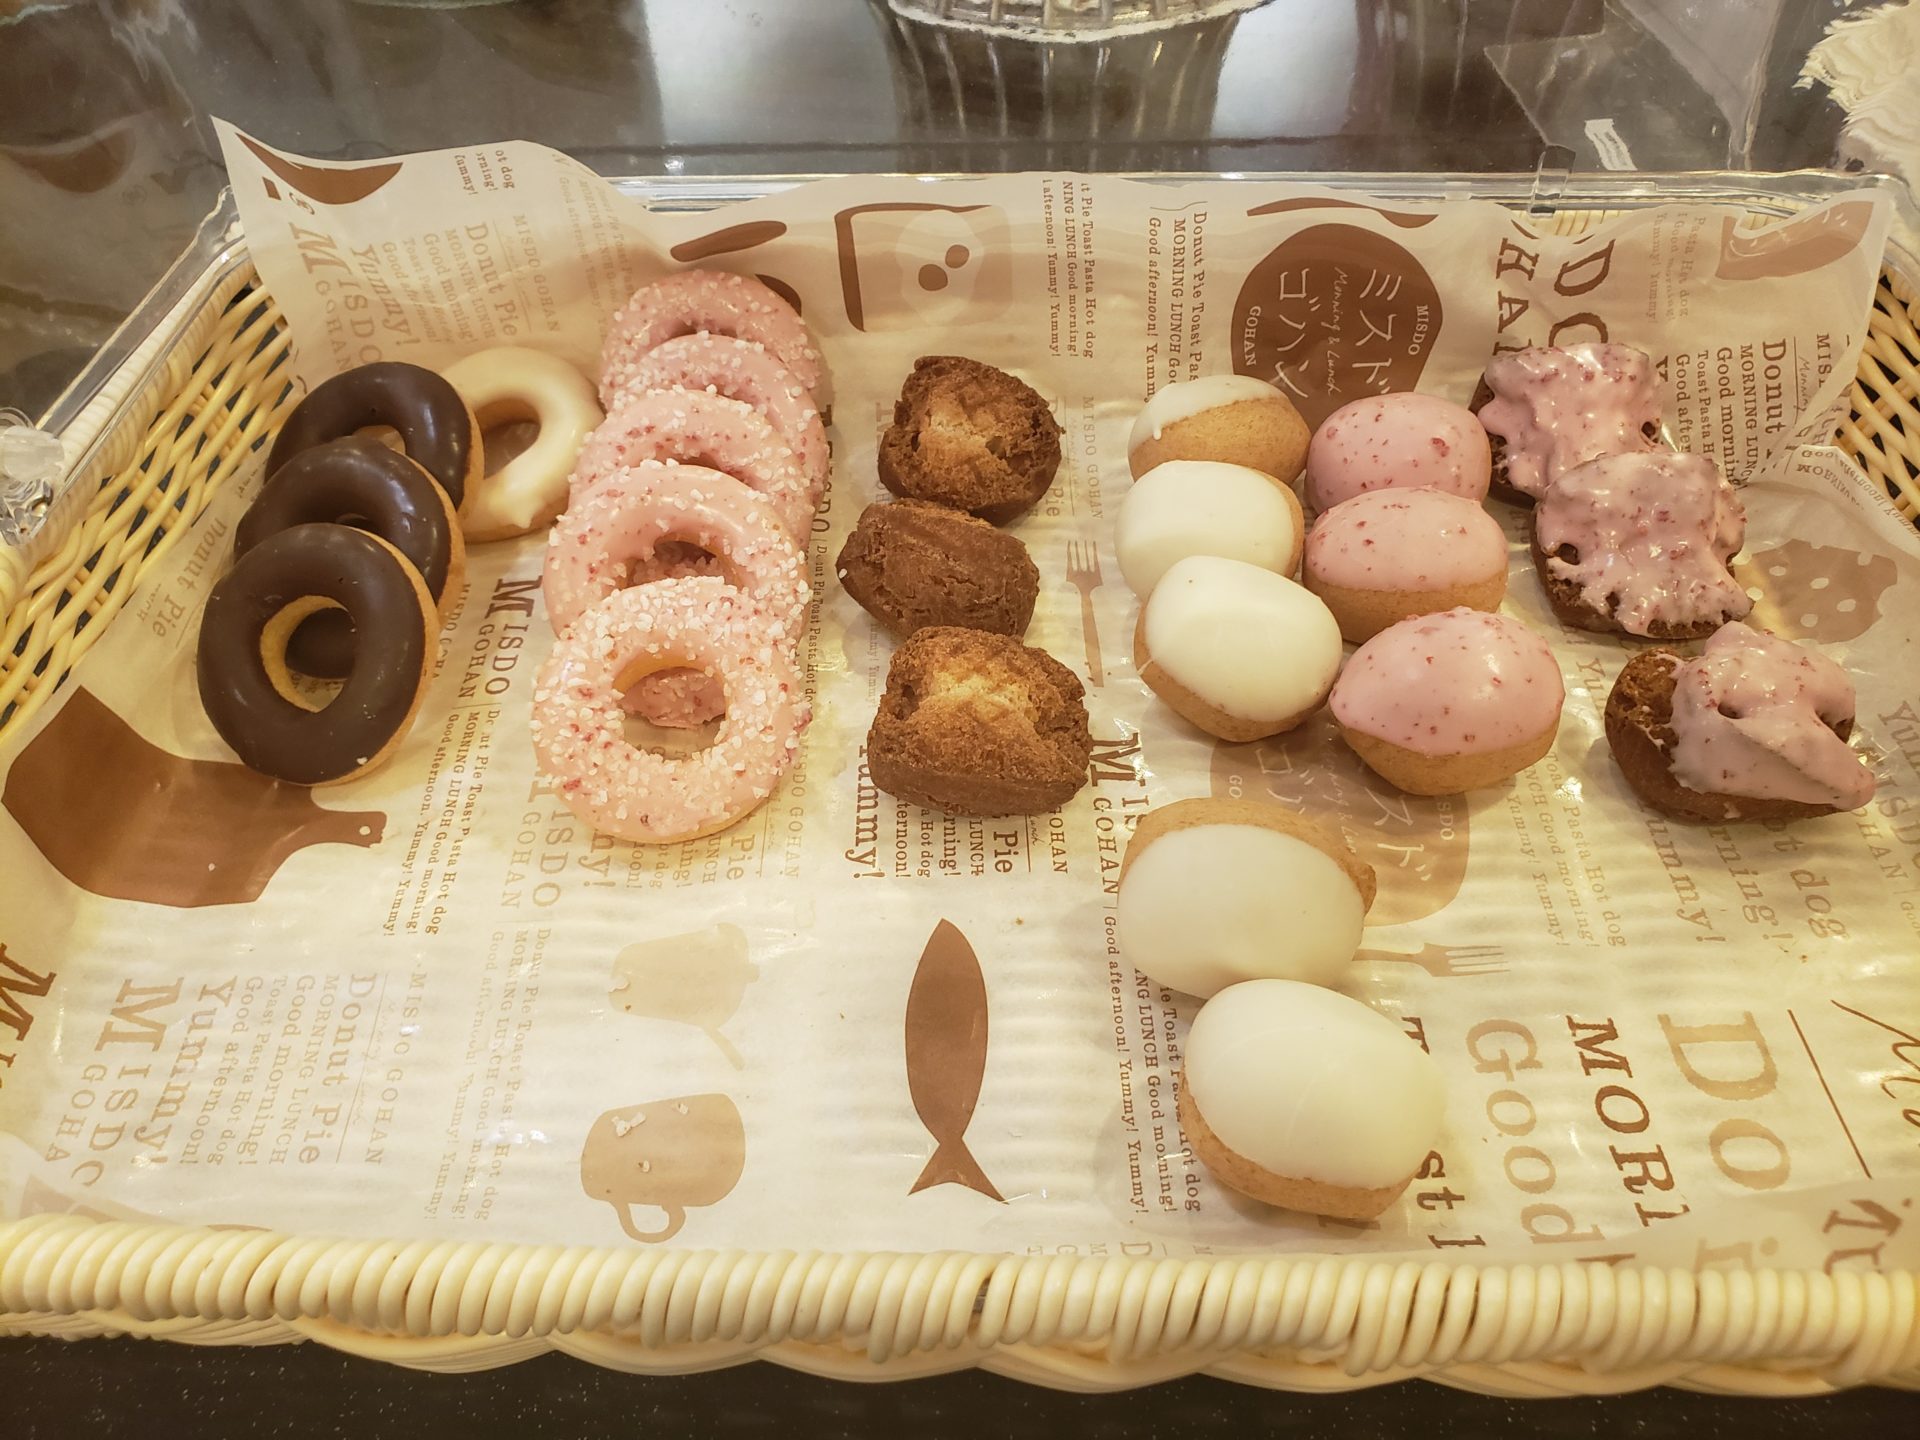 a basket of pastries and donuts